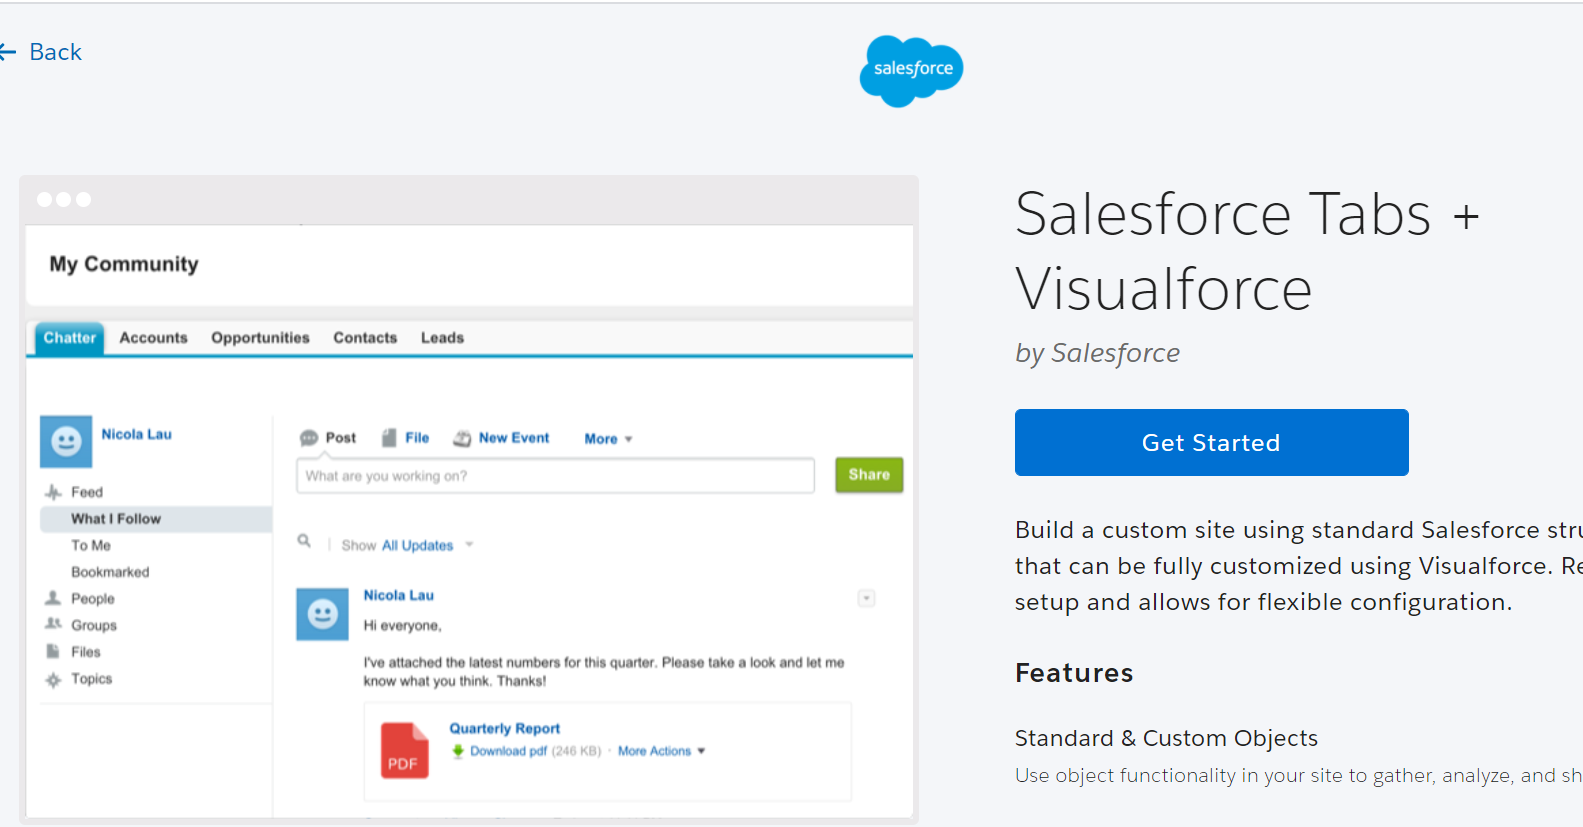 Salesforce Tabs and Visualforce